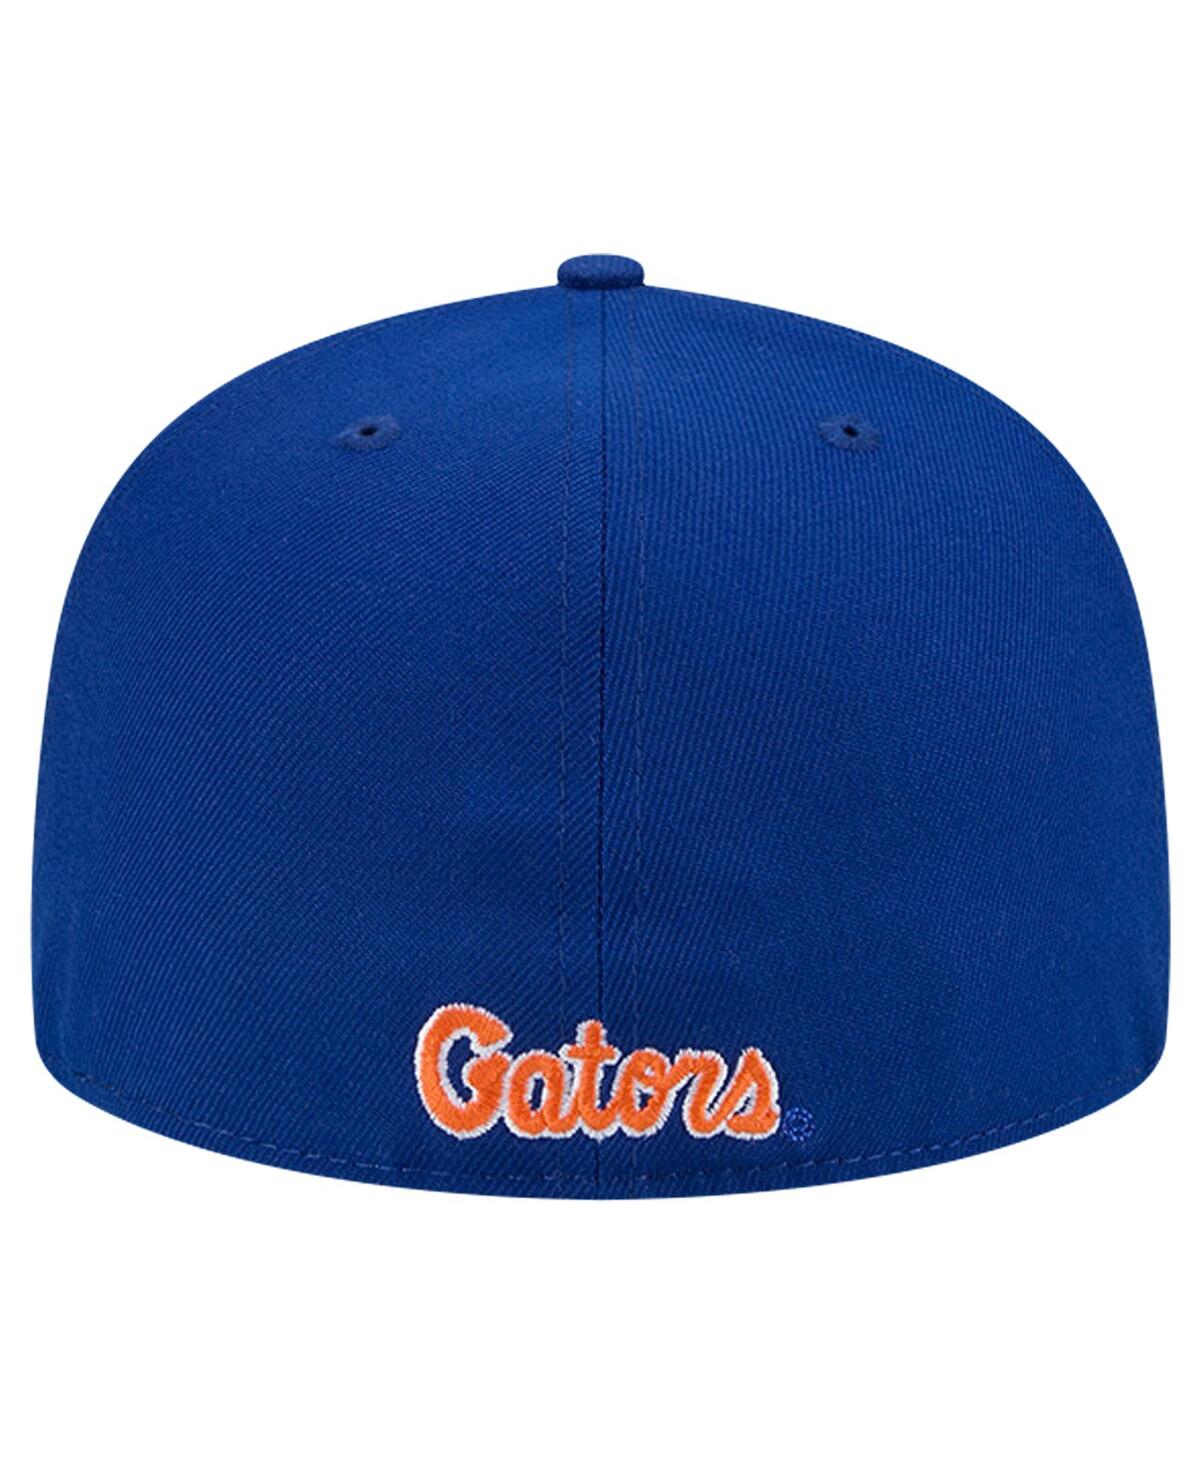 Shop New Era Men's Royal Florida Gators Throwback 59fifty Fitted Hat